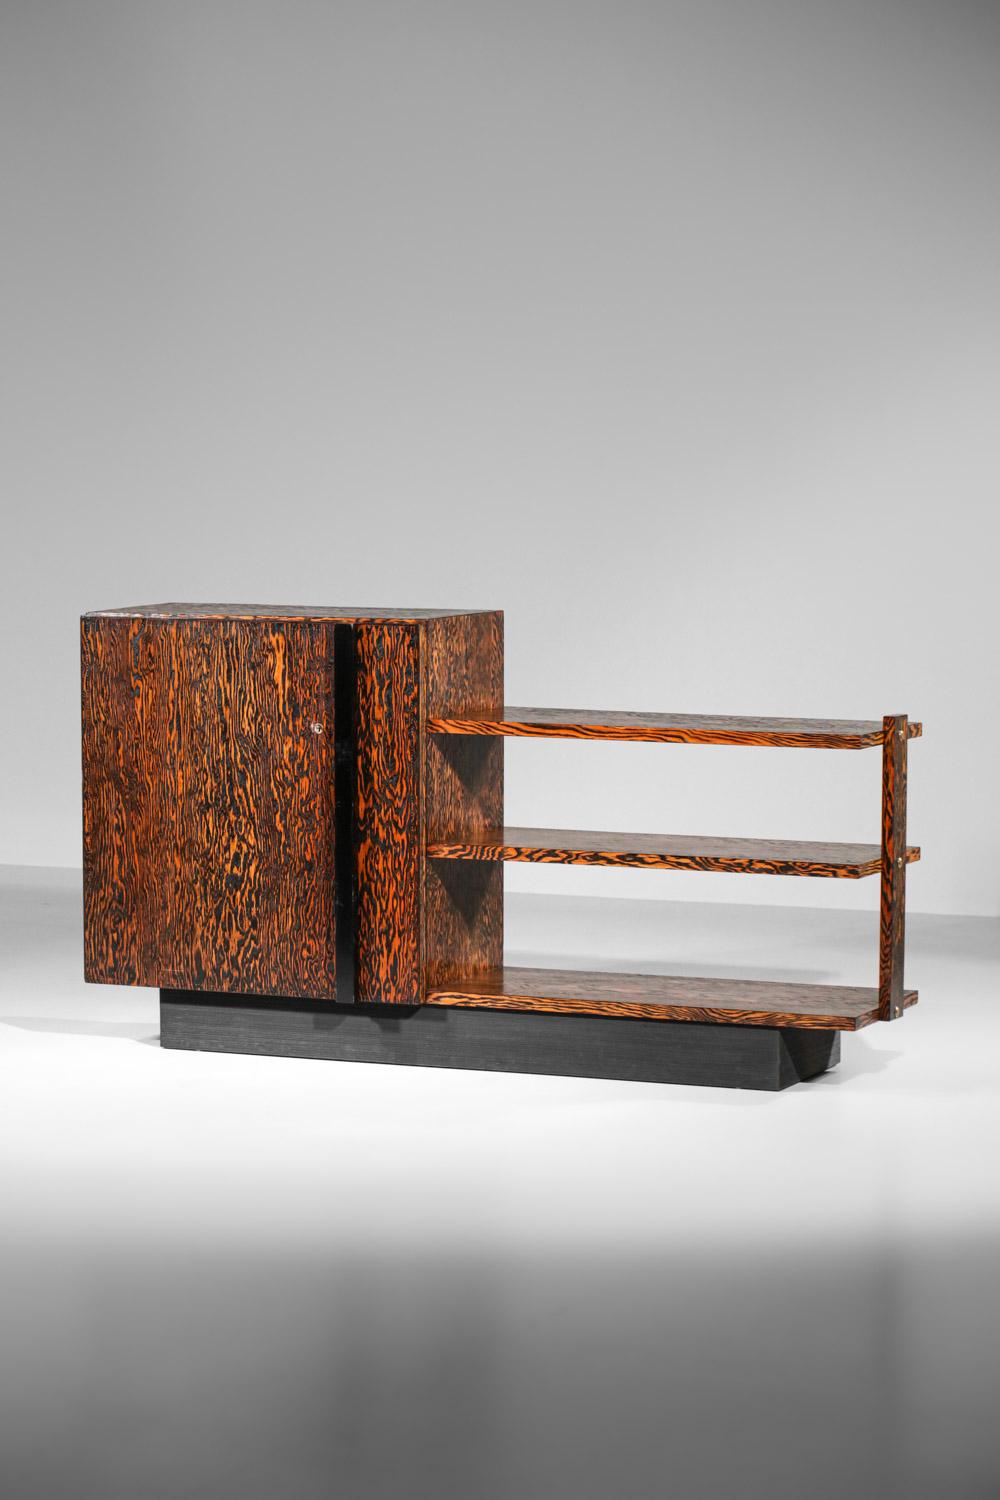 rare André Sornay sideboard in Oregon pine and studded 40s art deco modernist  For Sale 1